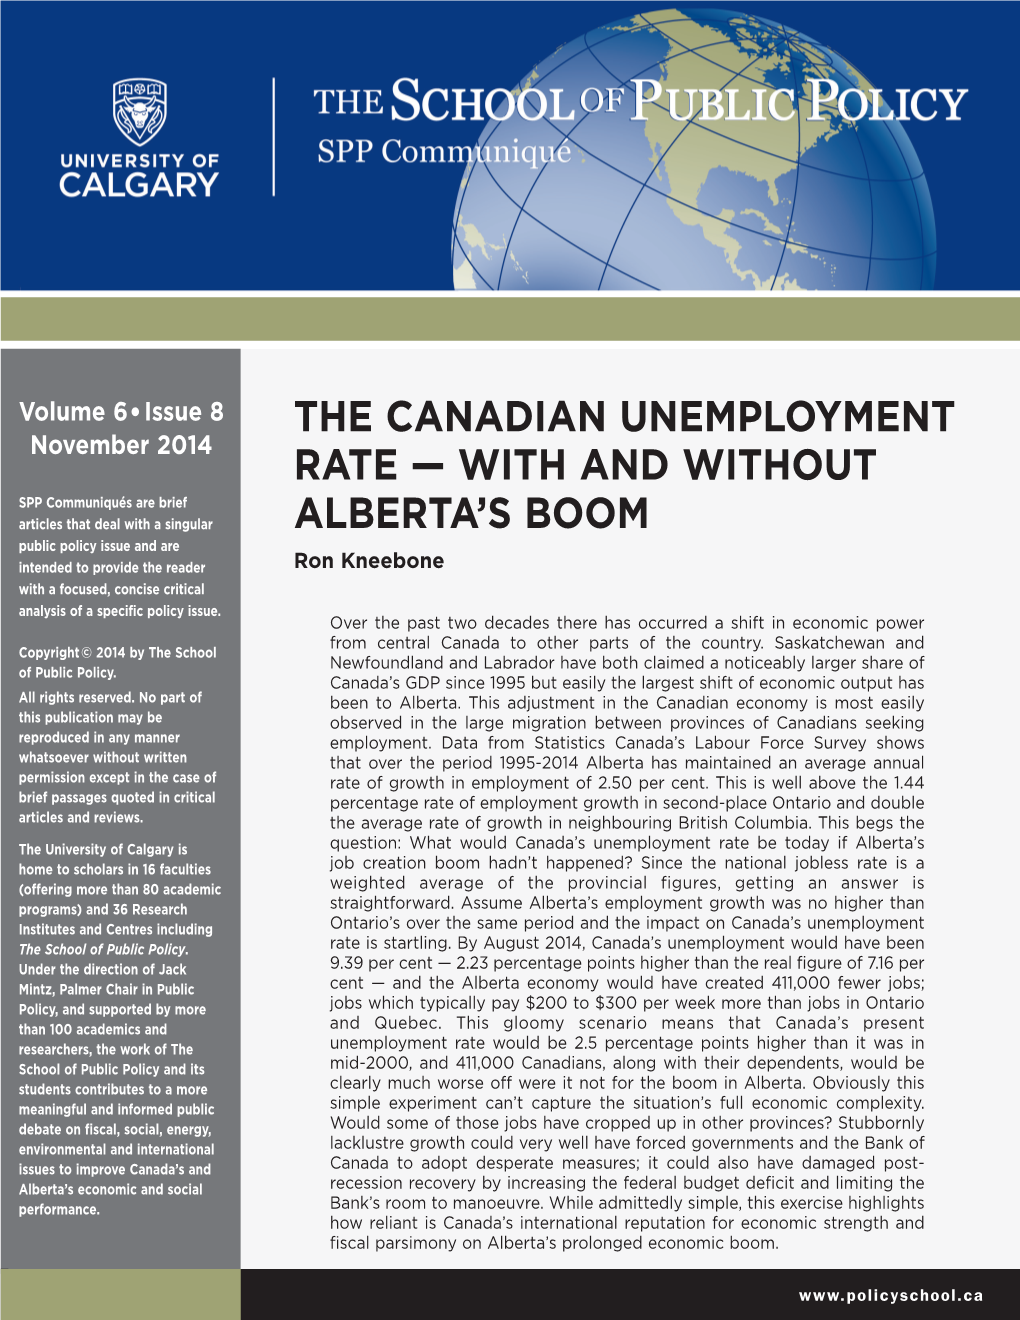 The Canadian Unemployment Rate